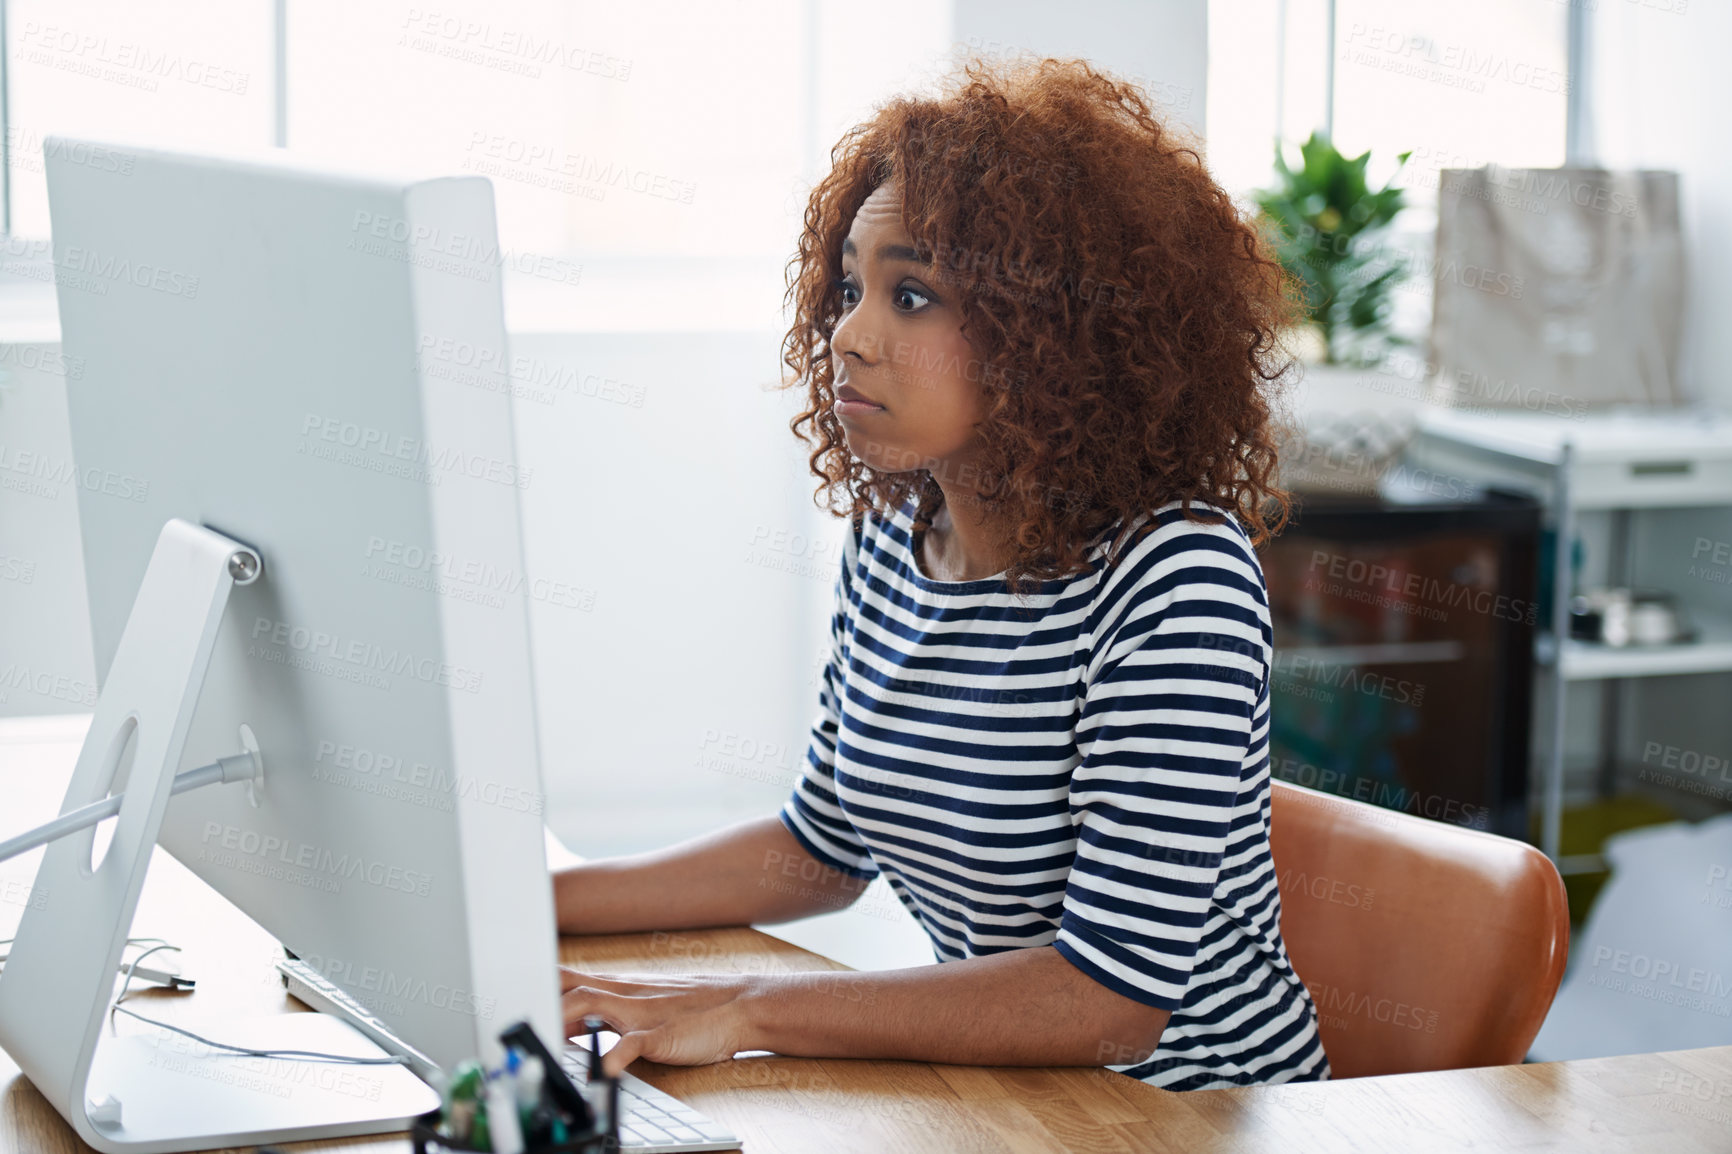 Buy stock photo Shot of a young woman at work on a computer in an office